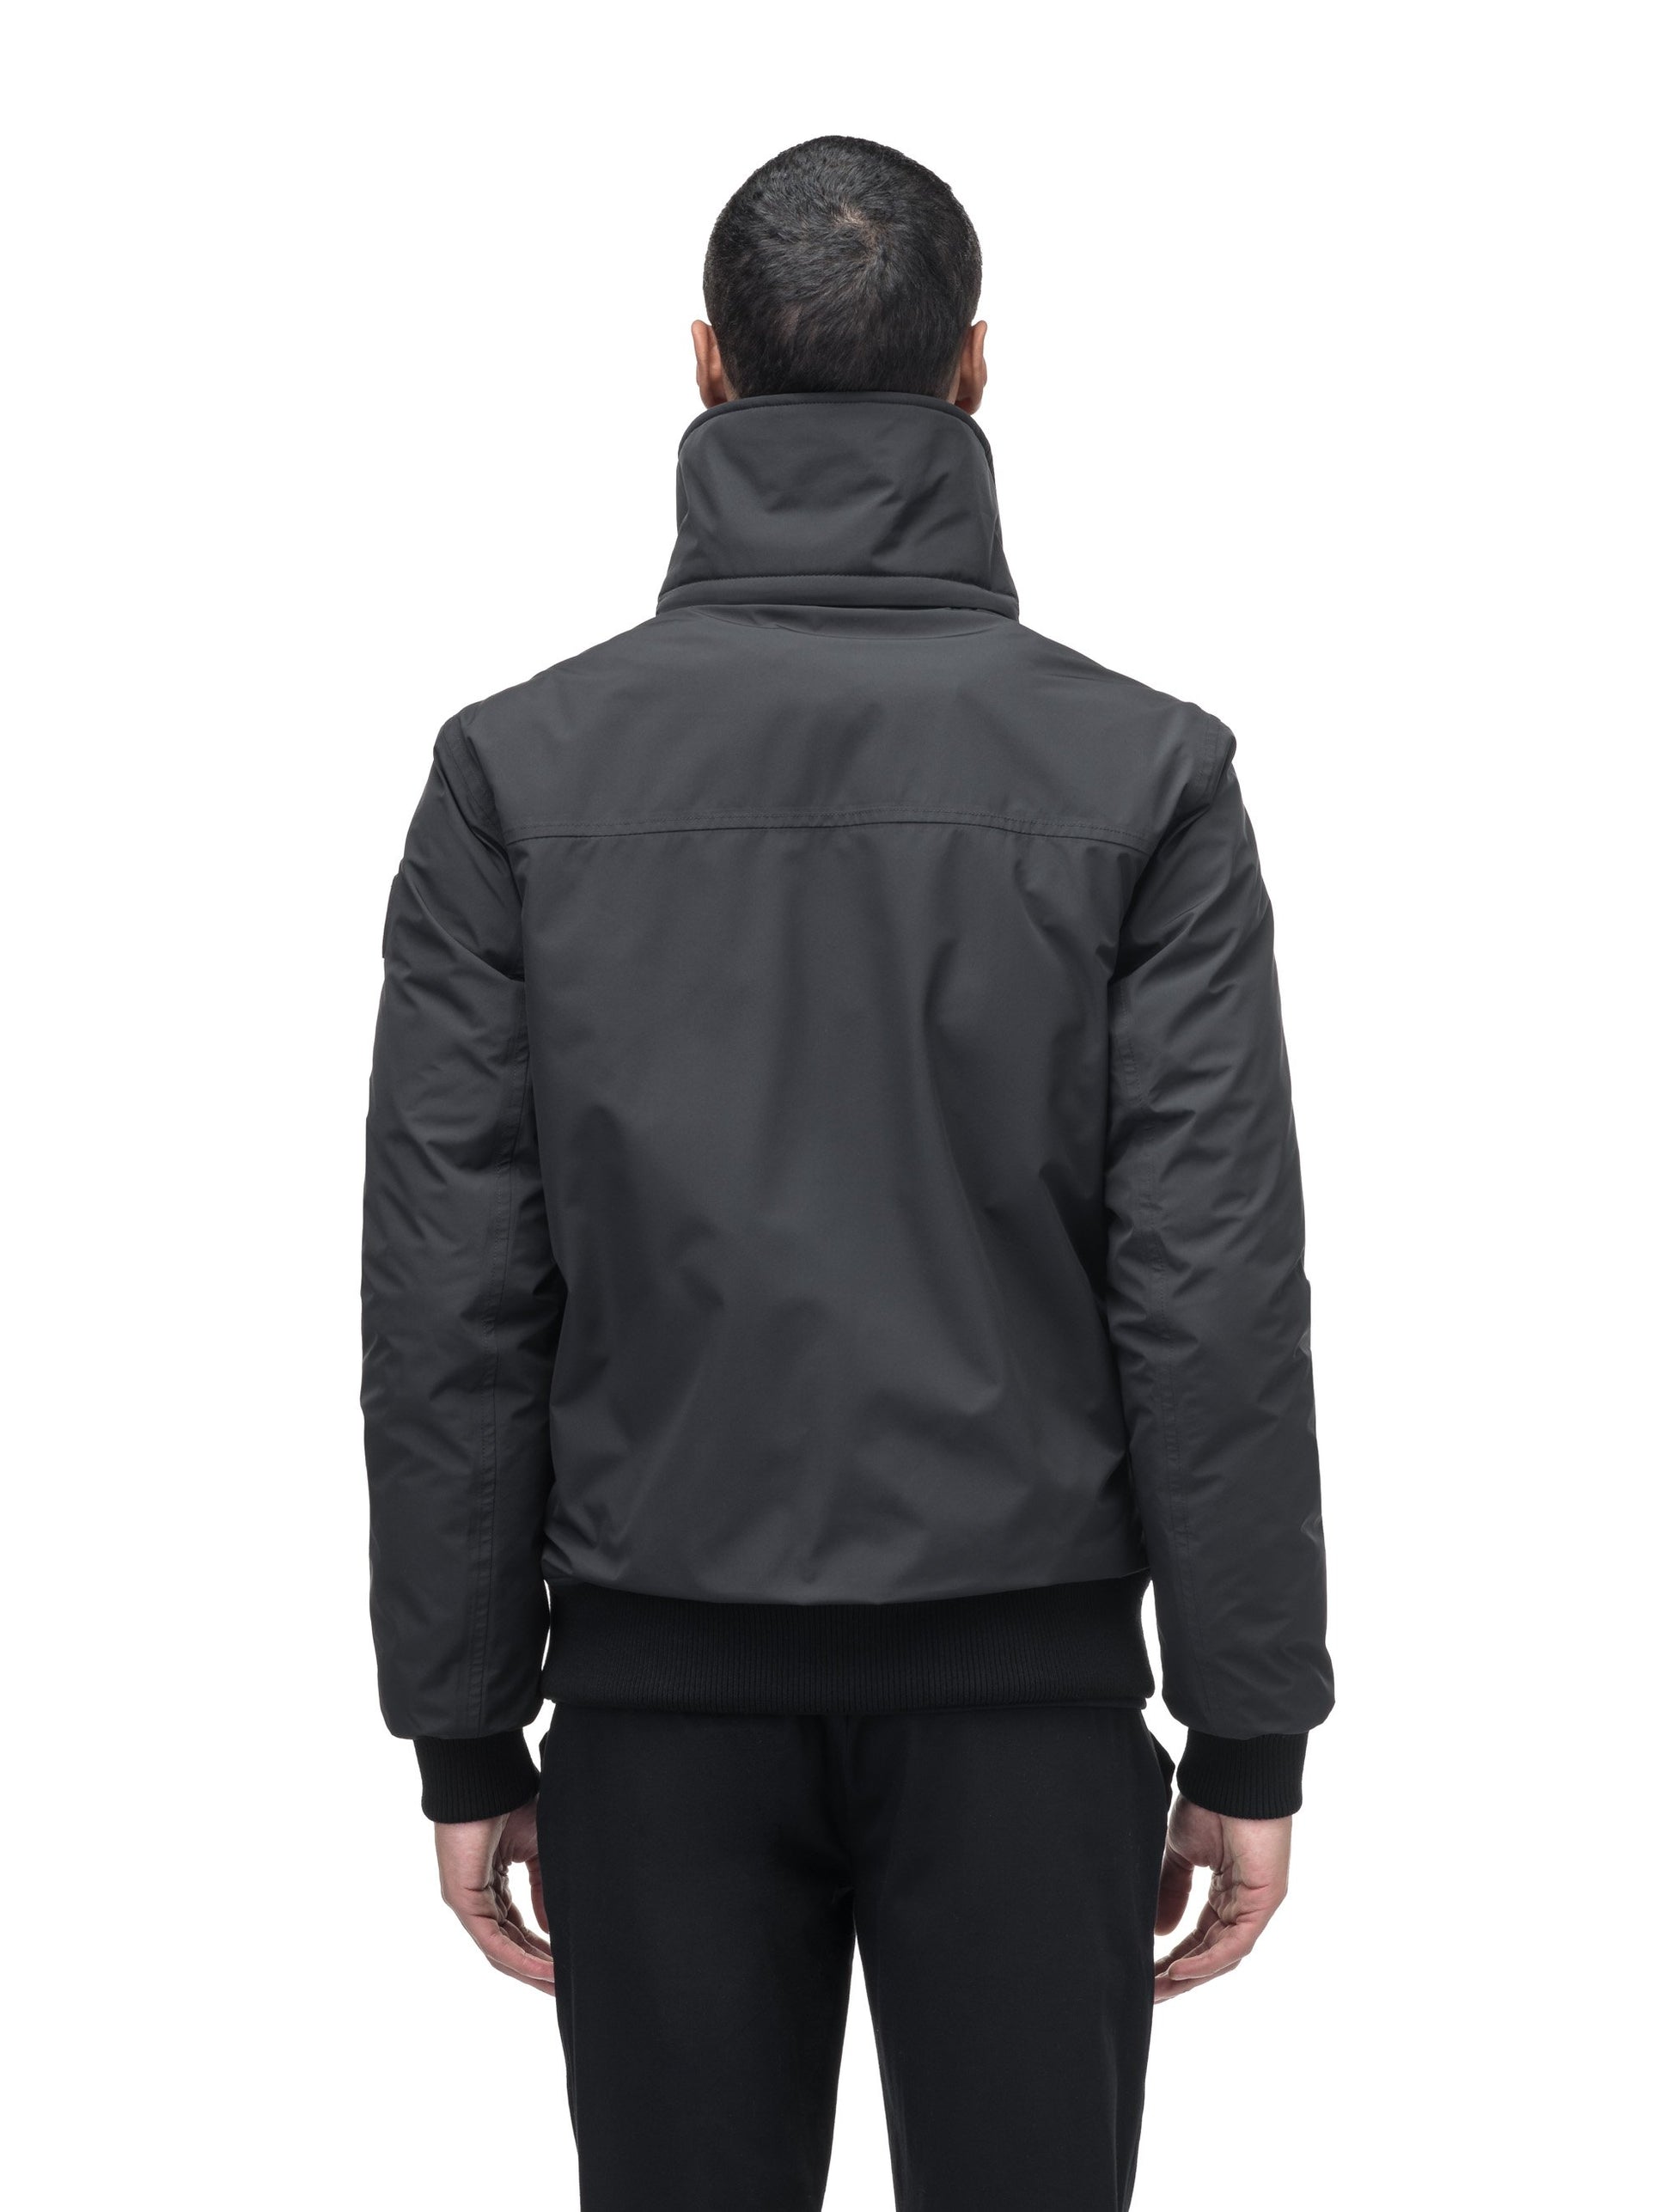 Sonar Men's Aviator Jacket in hip length, Canadian duck down insulation, removable shearling collar with hidden tuckable hood, and two-way front zipper, in Black